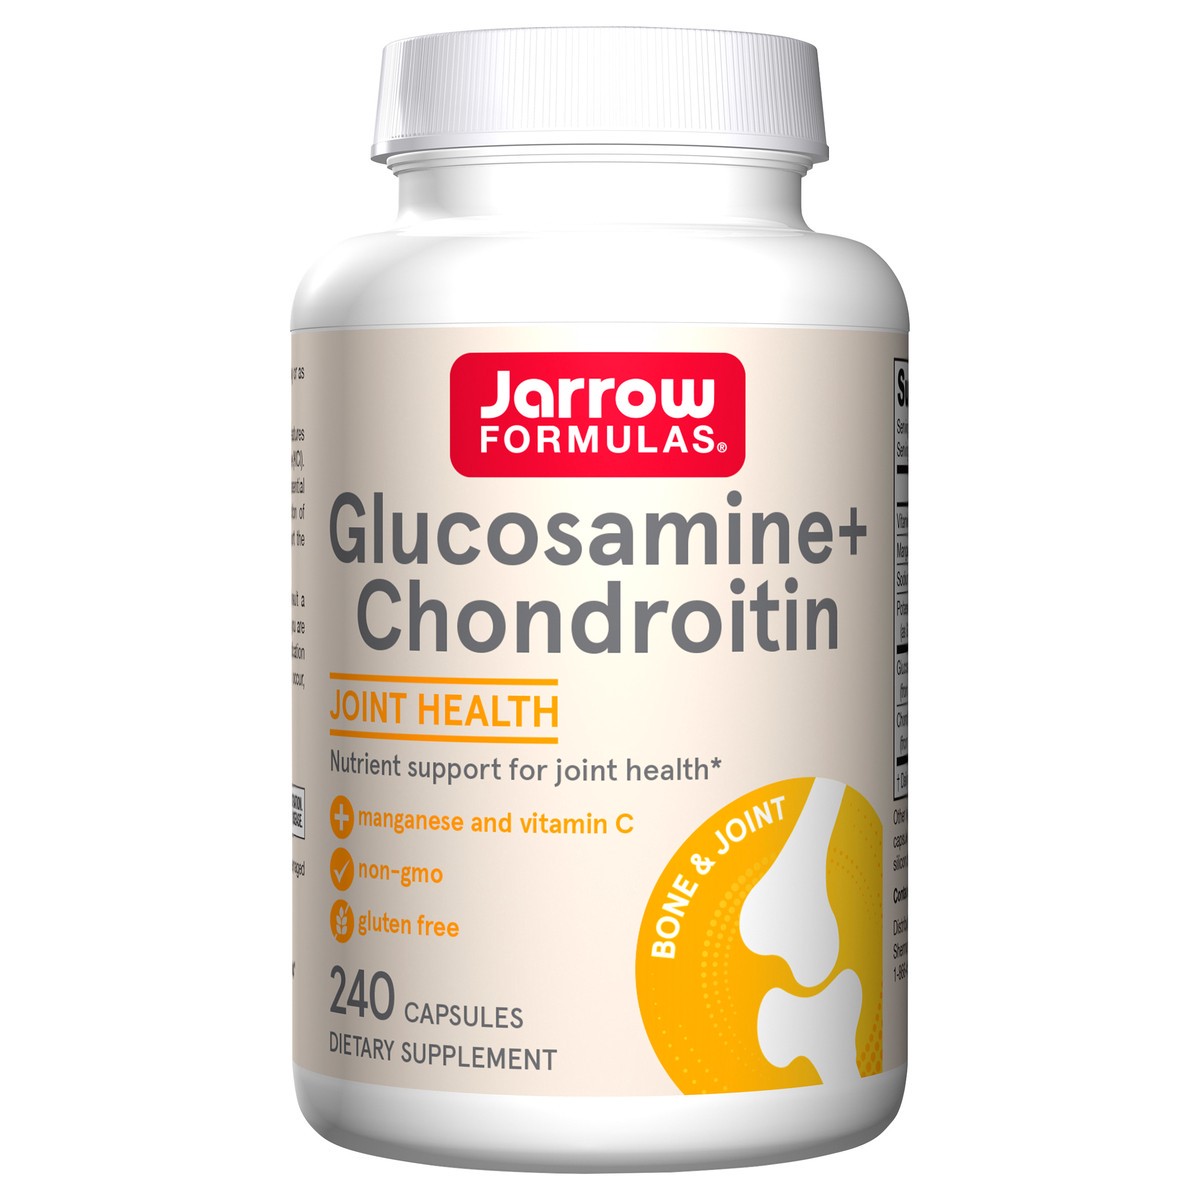 slide 1 of 5, Jarrow Formulas Glucosamine + Chondroitin - 240 Capsules - Nutrient Support - Dietary Supplement for Joint Health - With Vitamin C & Manganese - 60 Servings, 240 ct